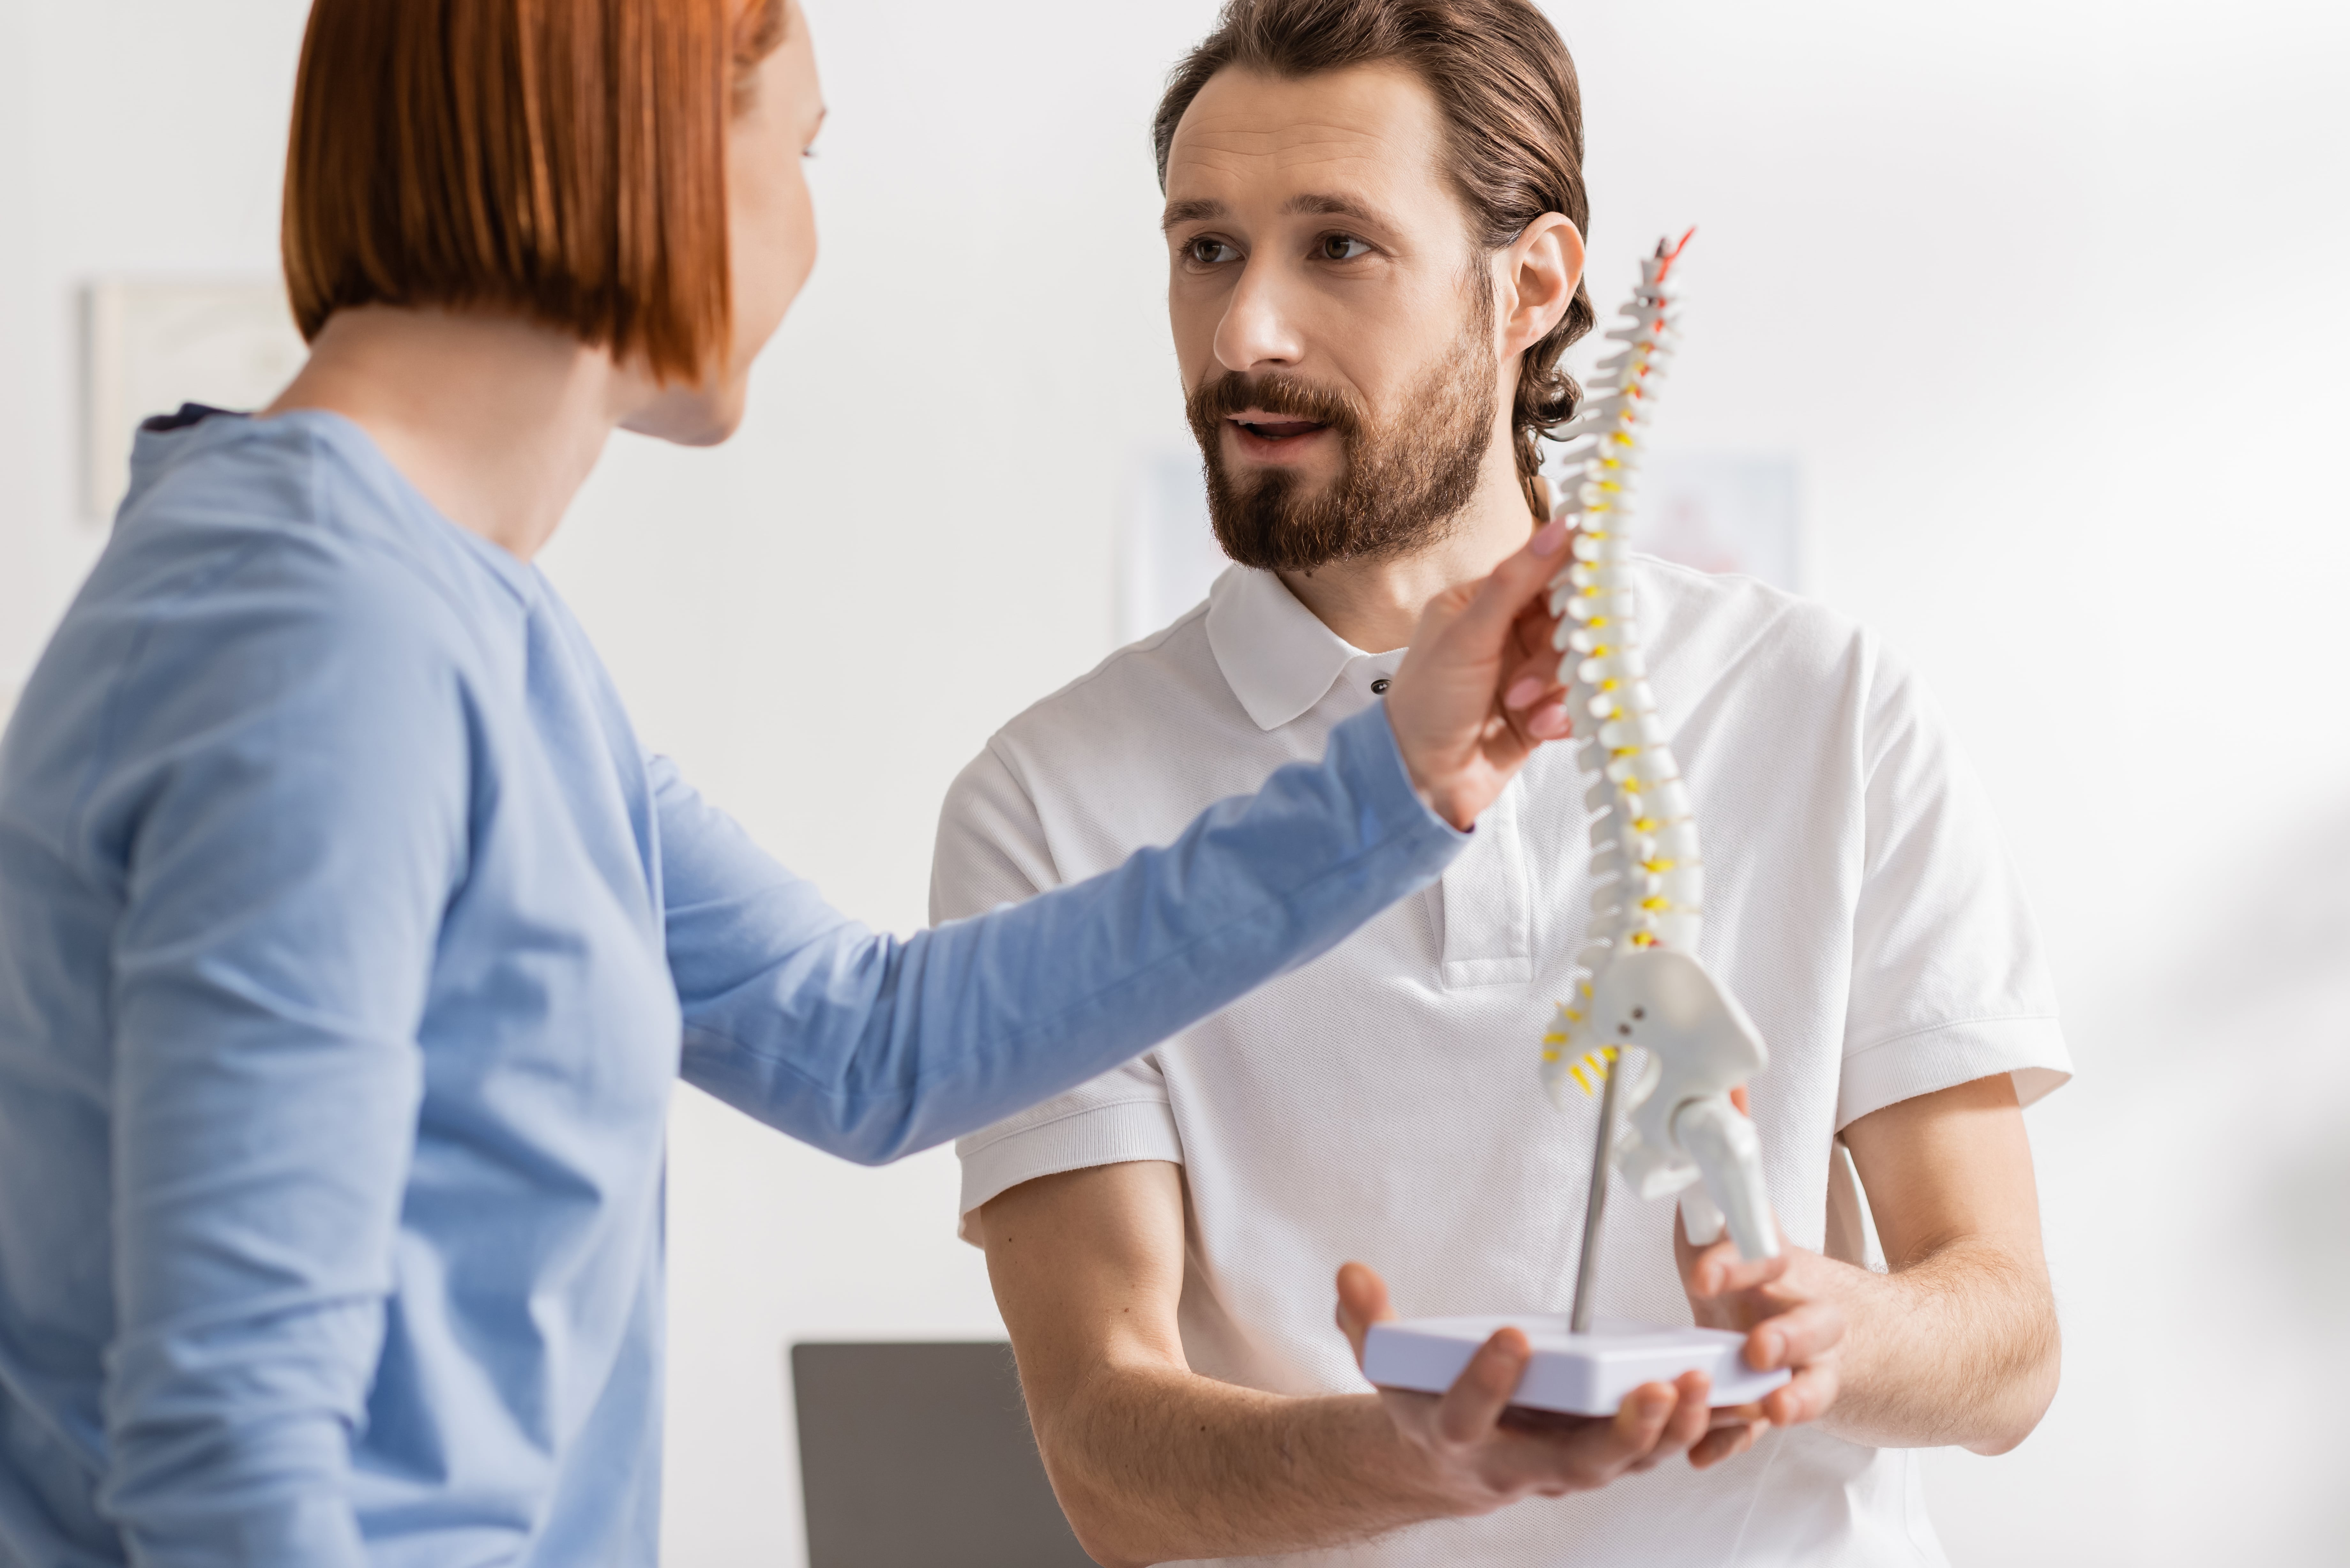 Chiropractor showing spine model to patient.